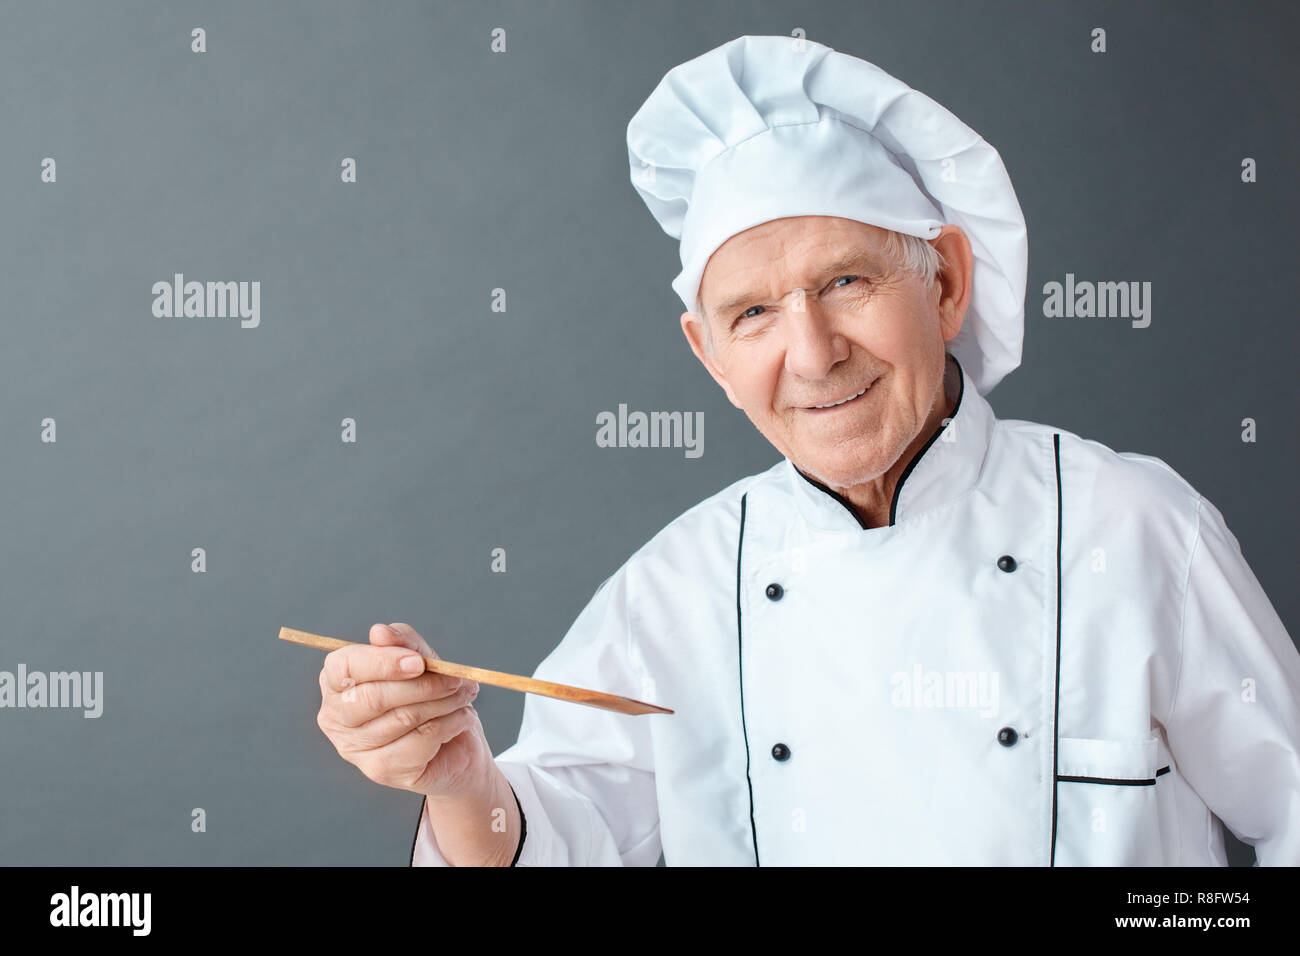 Senior chef studio standing isolated on gray holding spatula looking camera positive close-up Stock Photo